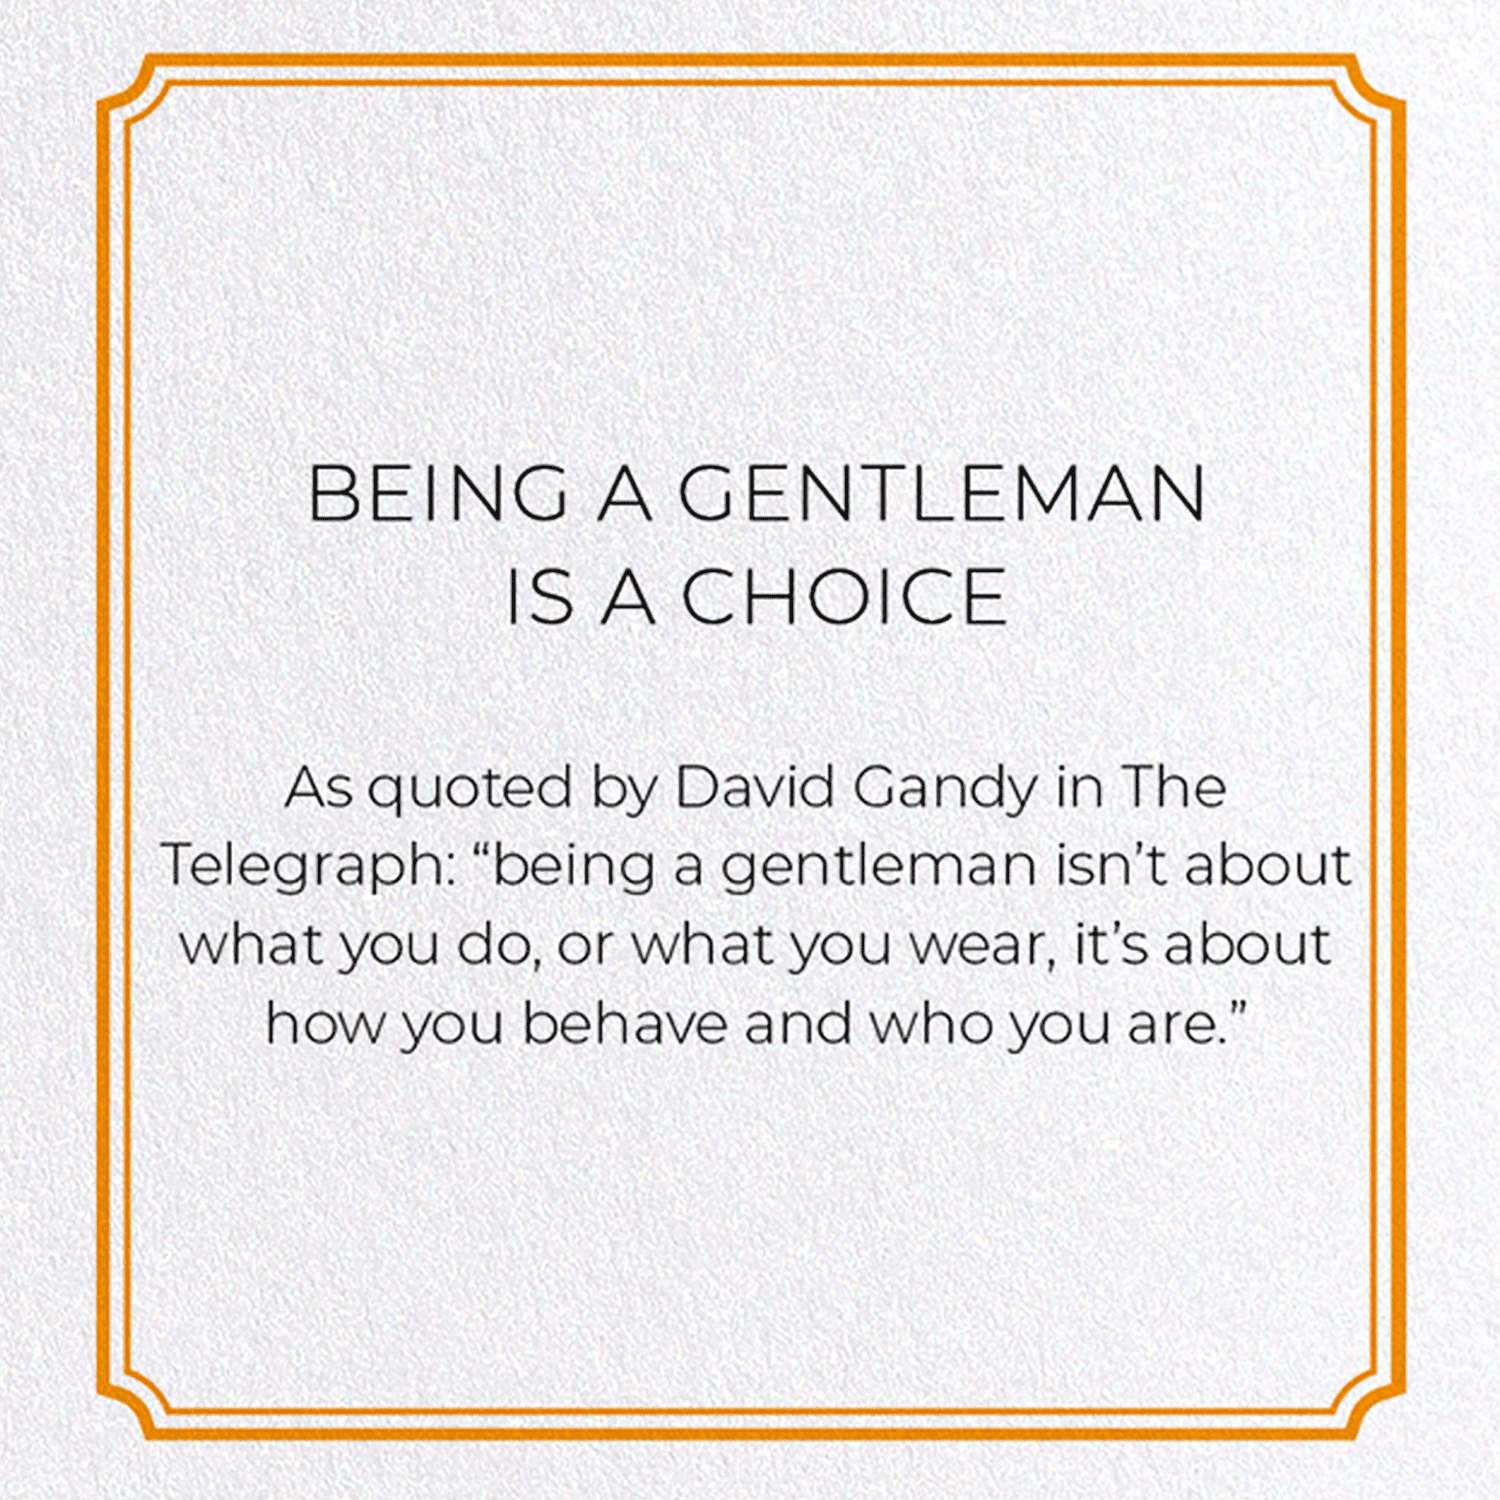 BEING A GENTLEMAN IS A CHOICE: Vintage Greeting Card